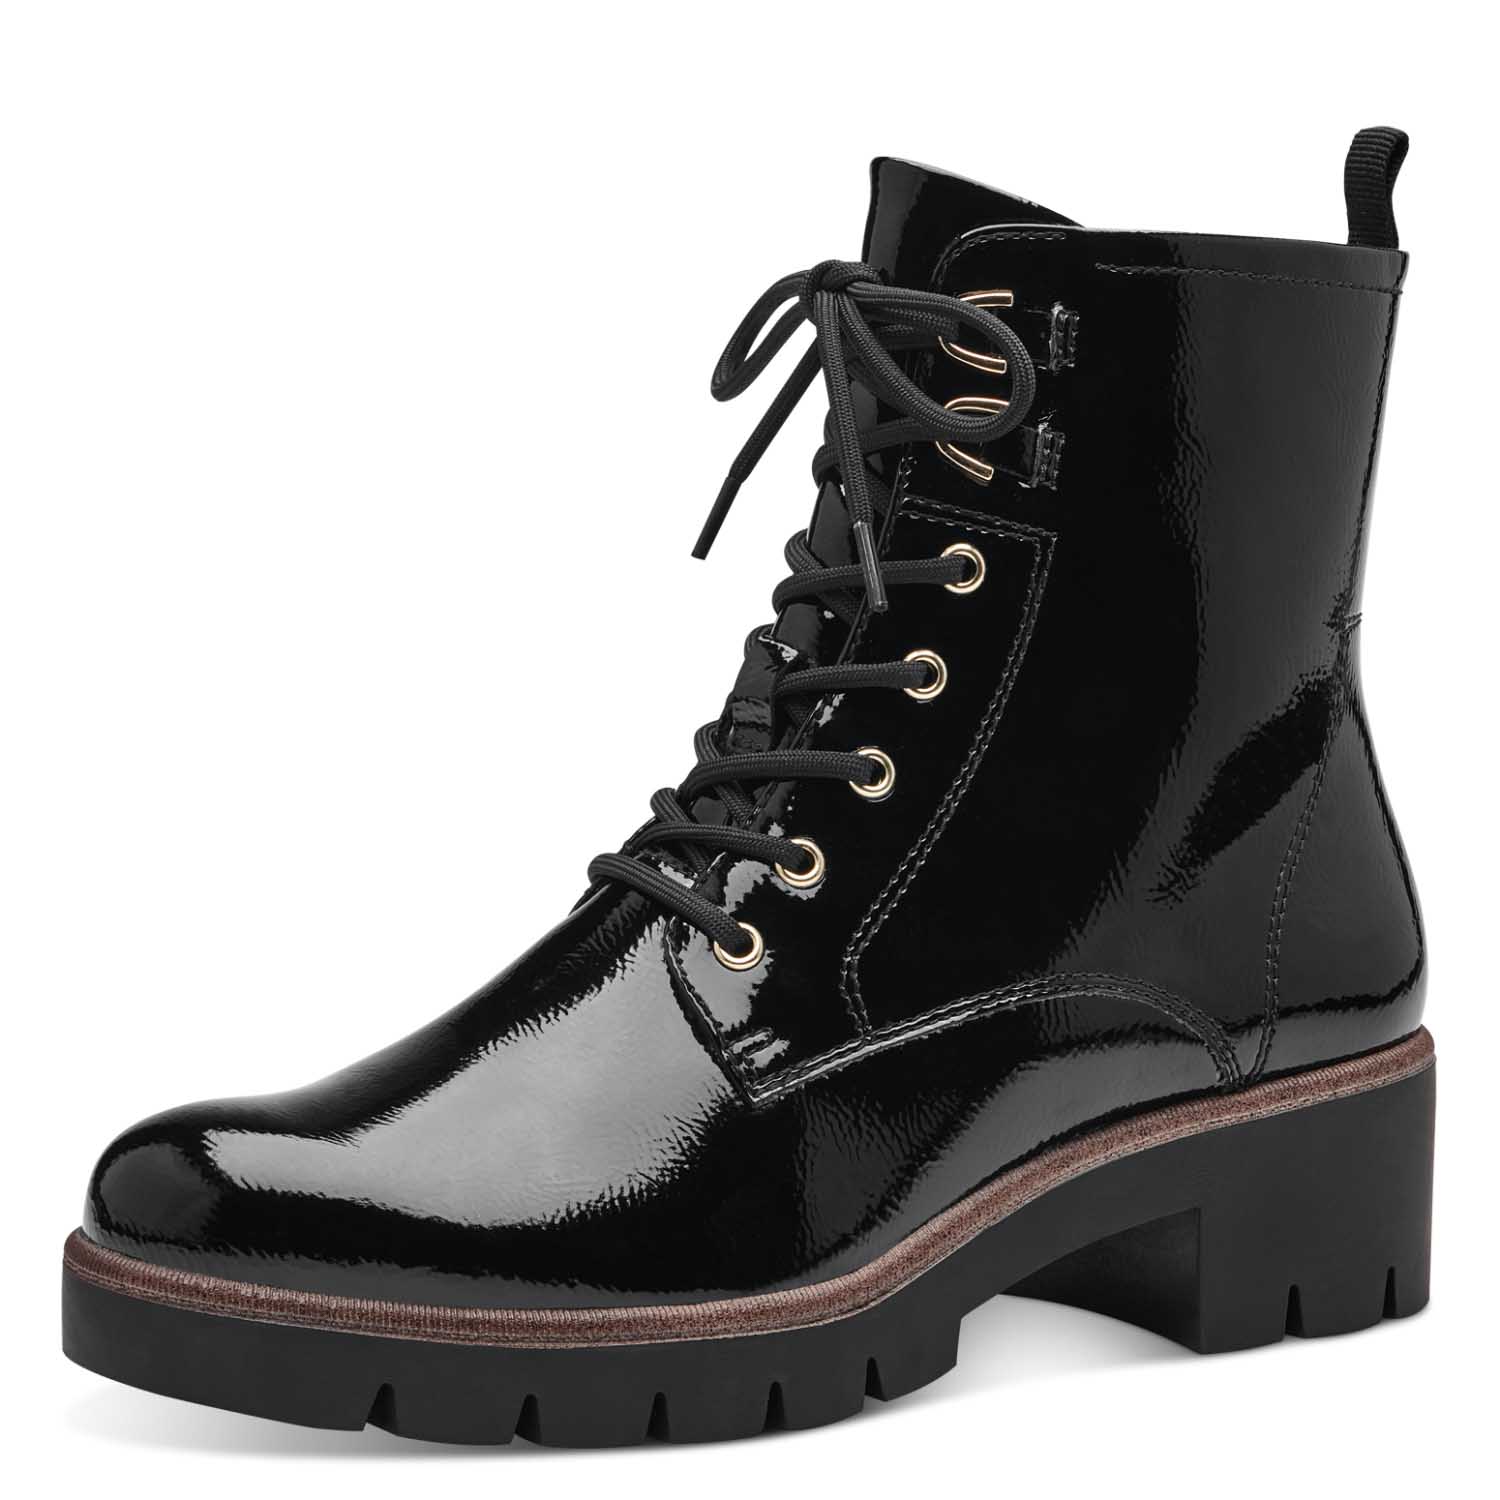 Angular view of the boots, highlighting the lace-up design and brown strip around the sole.